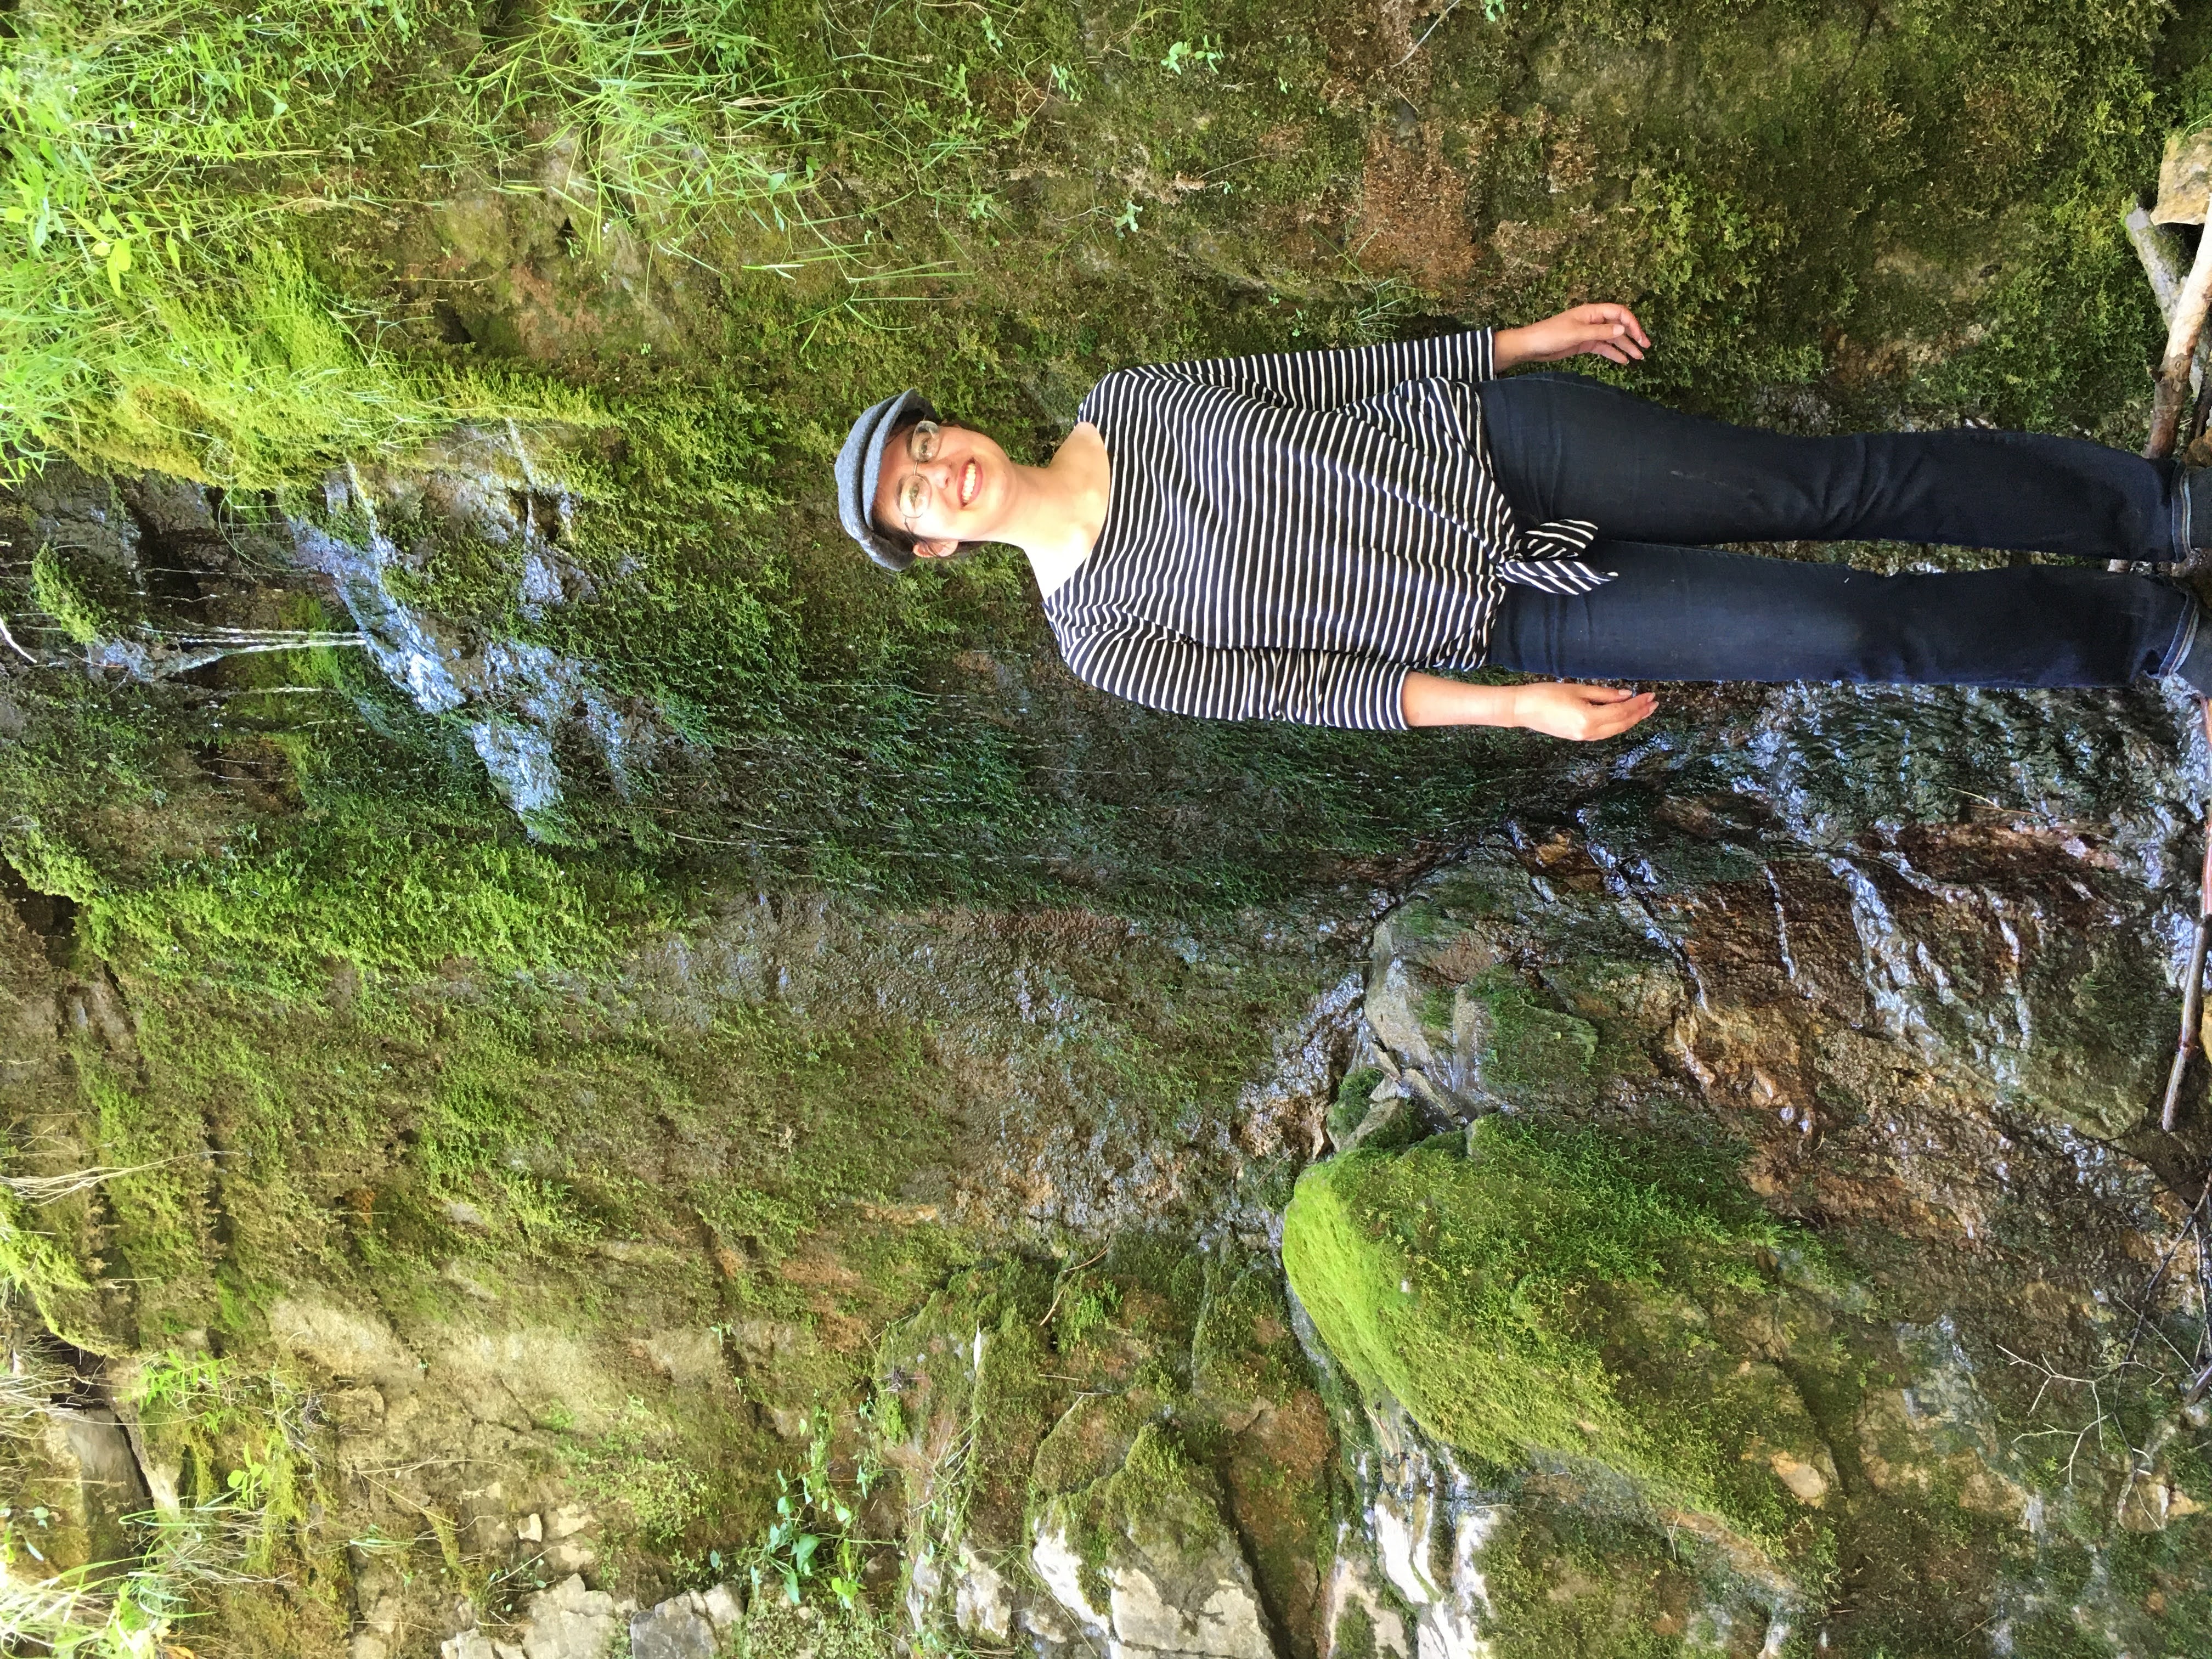 A canyon drip wall covered with moss, August 2020